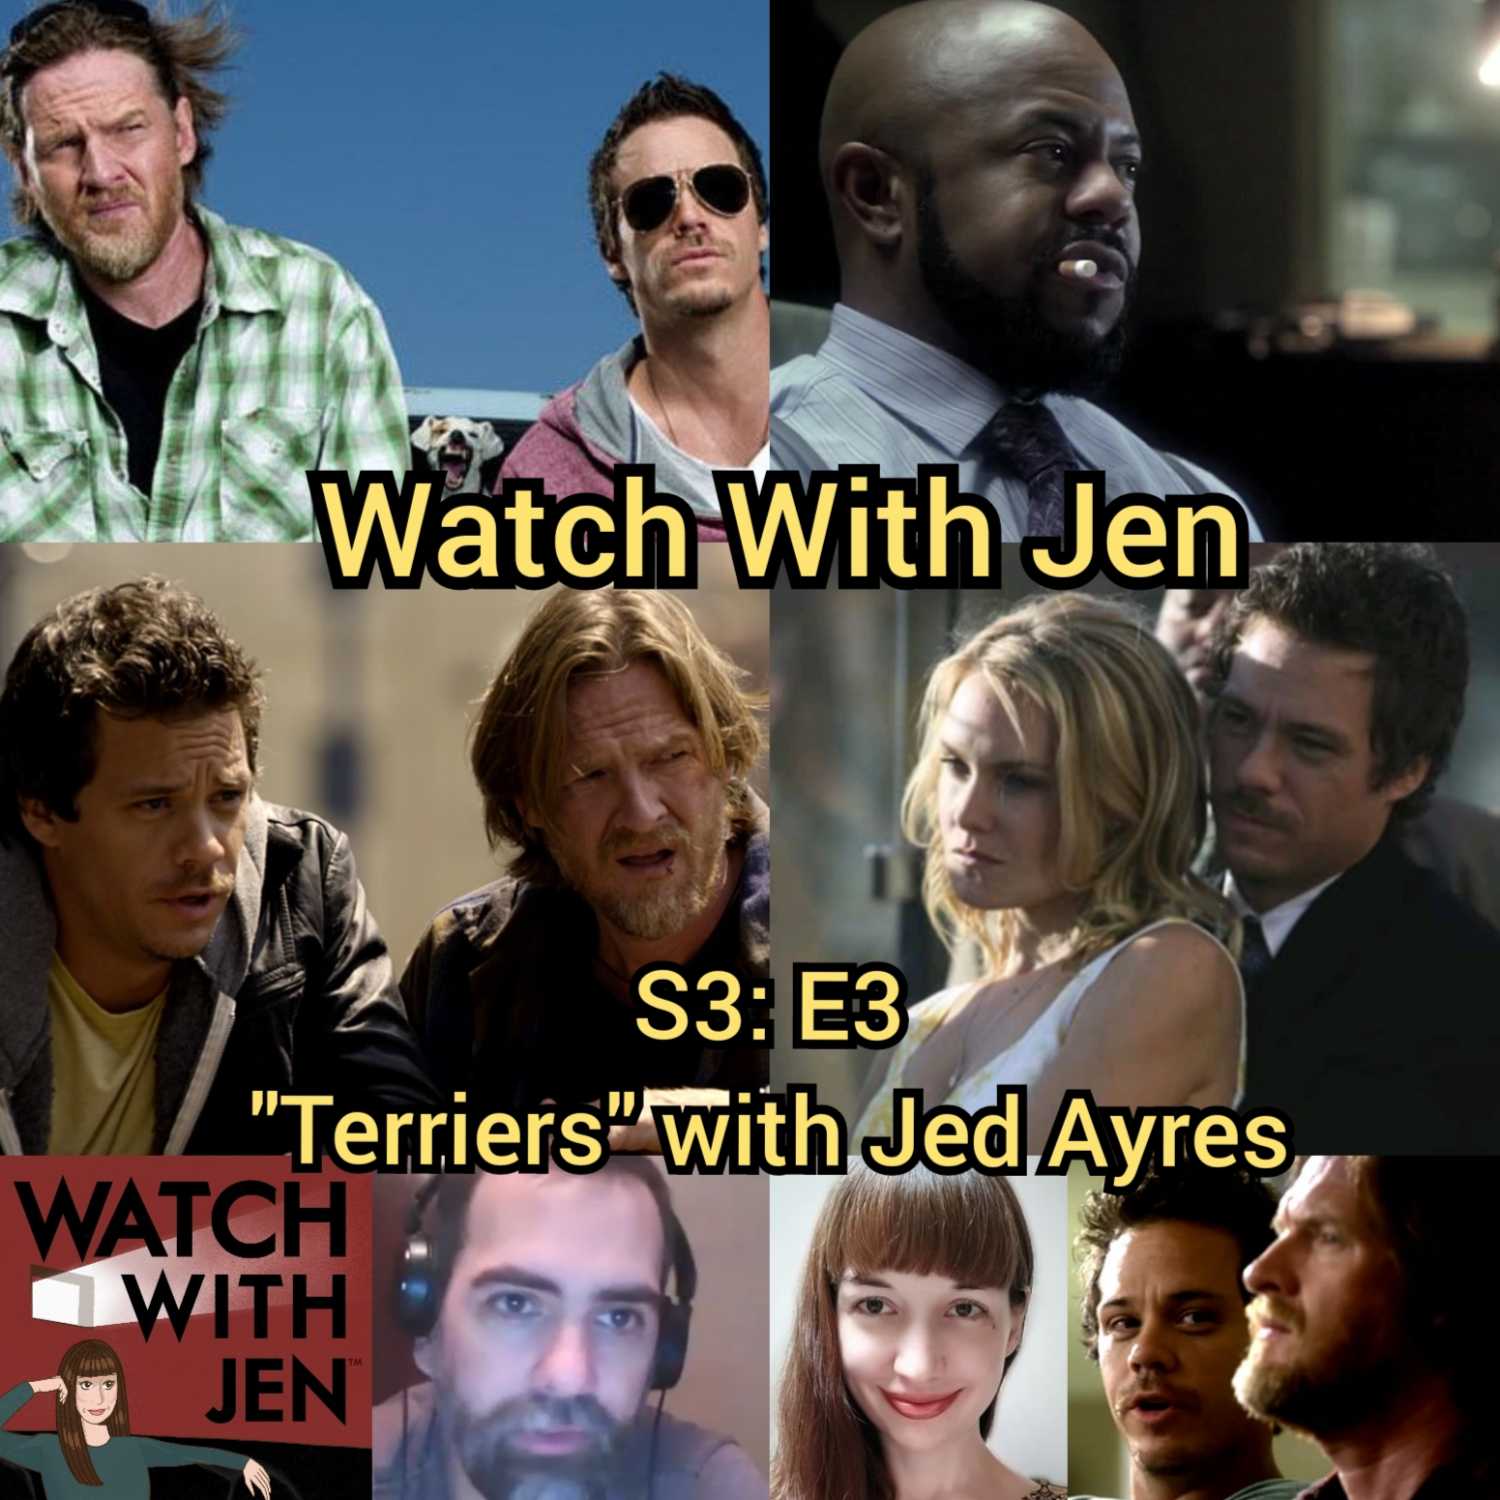 Watch With Jen - S3: E3 - ”Terriers” with Jed Ayres